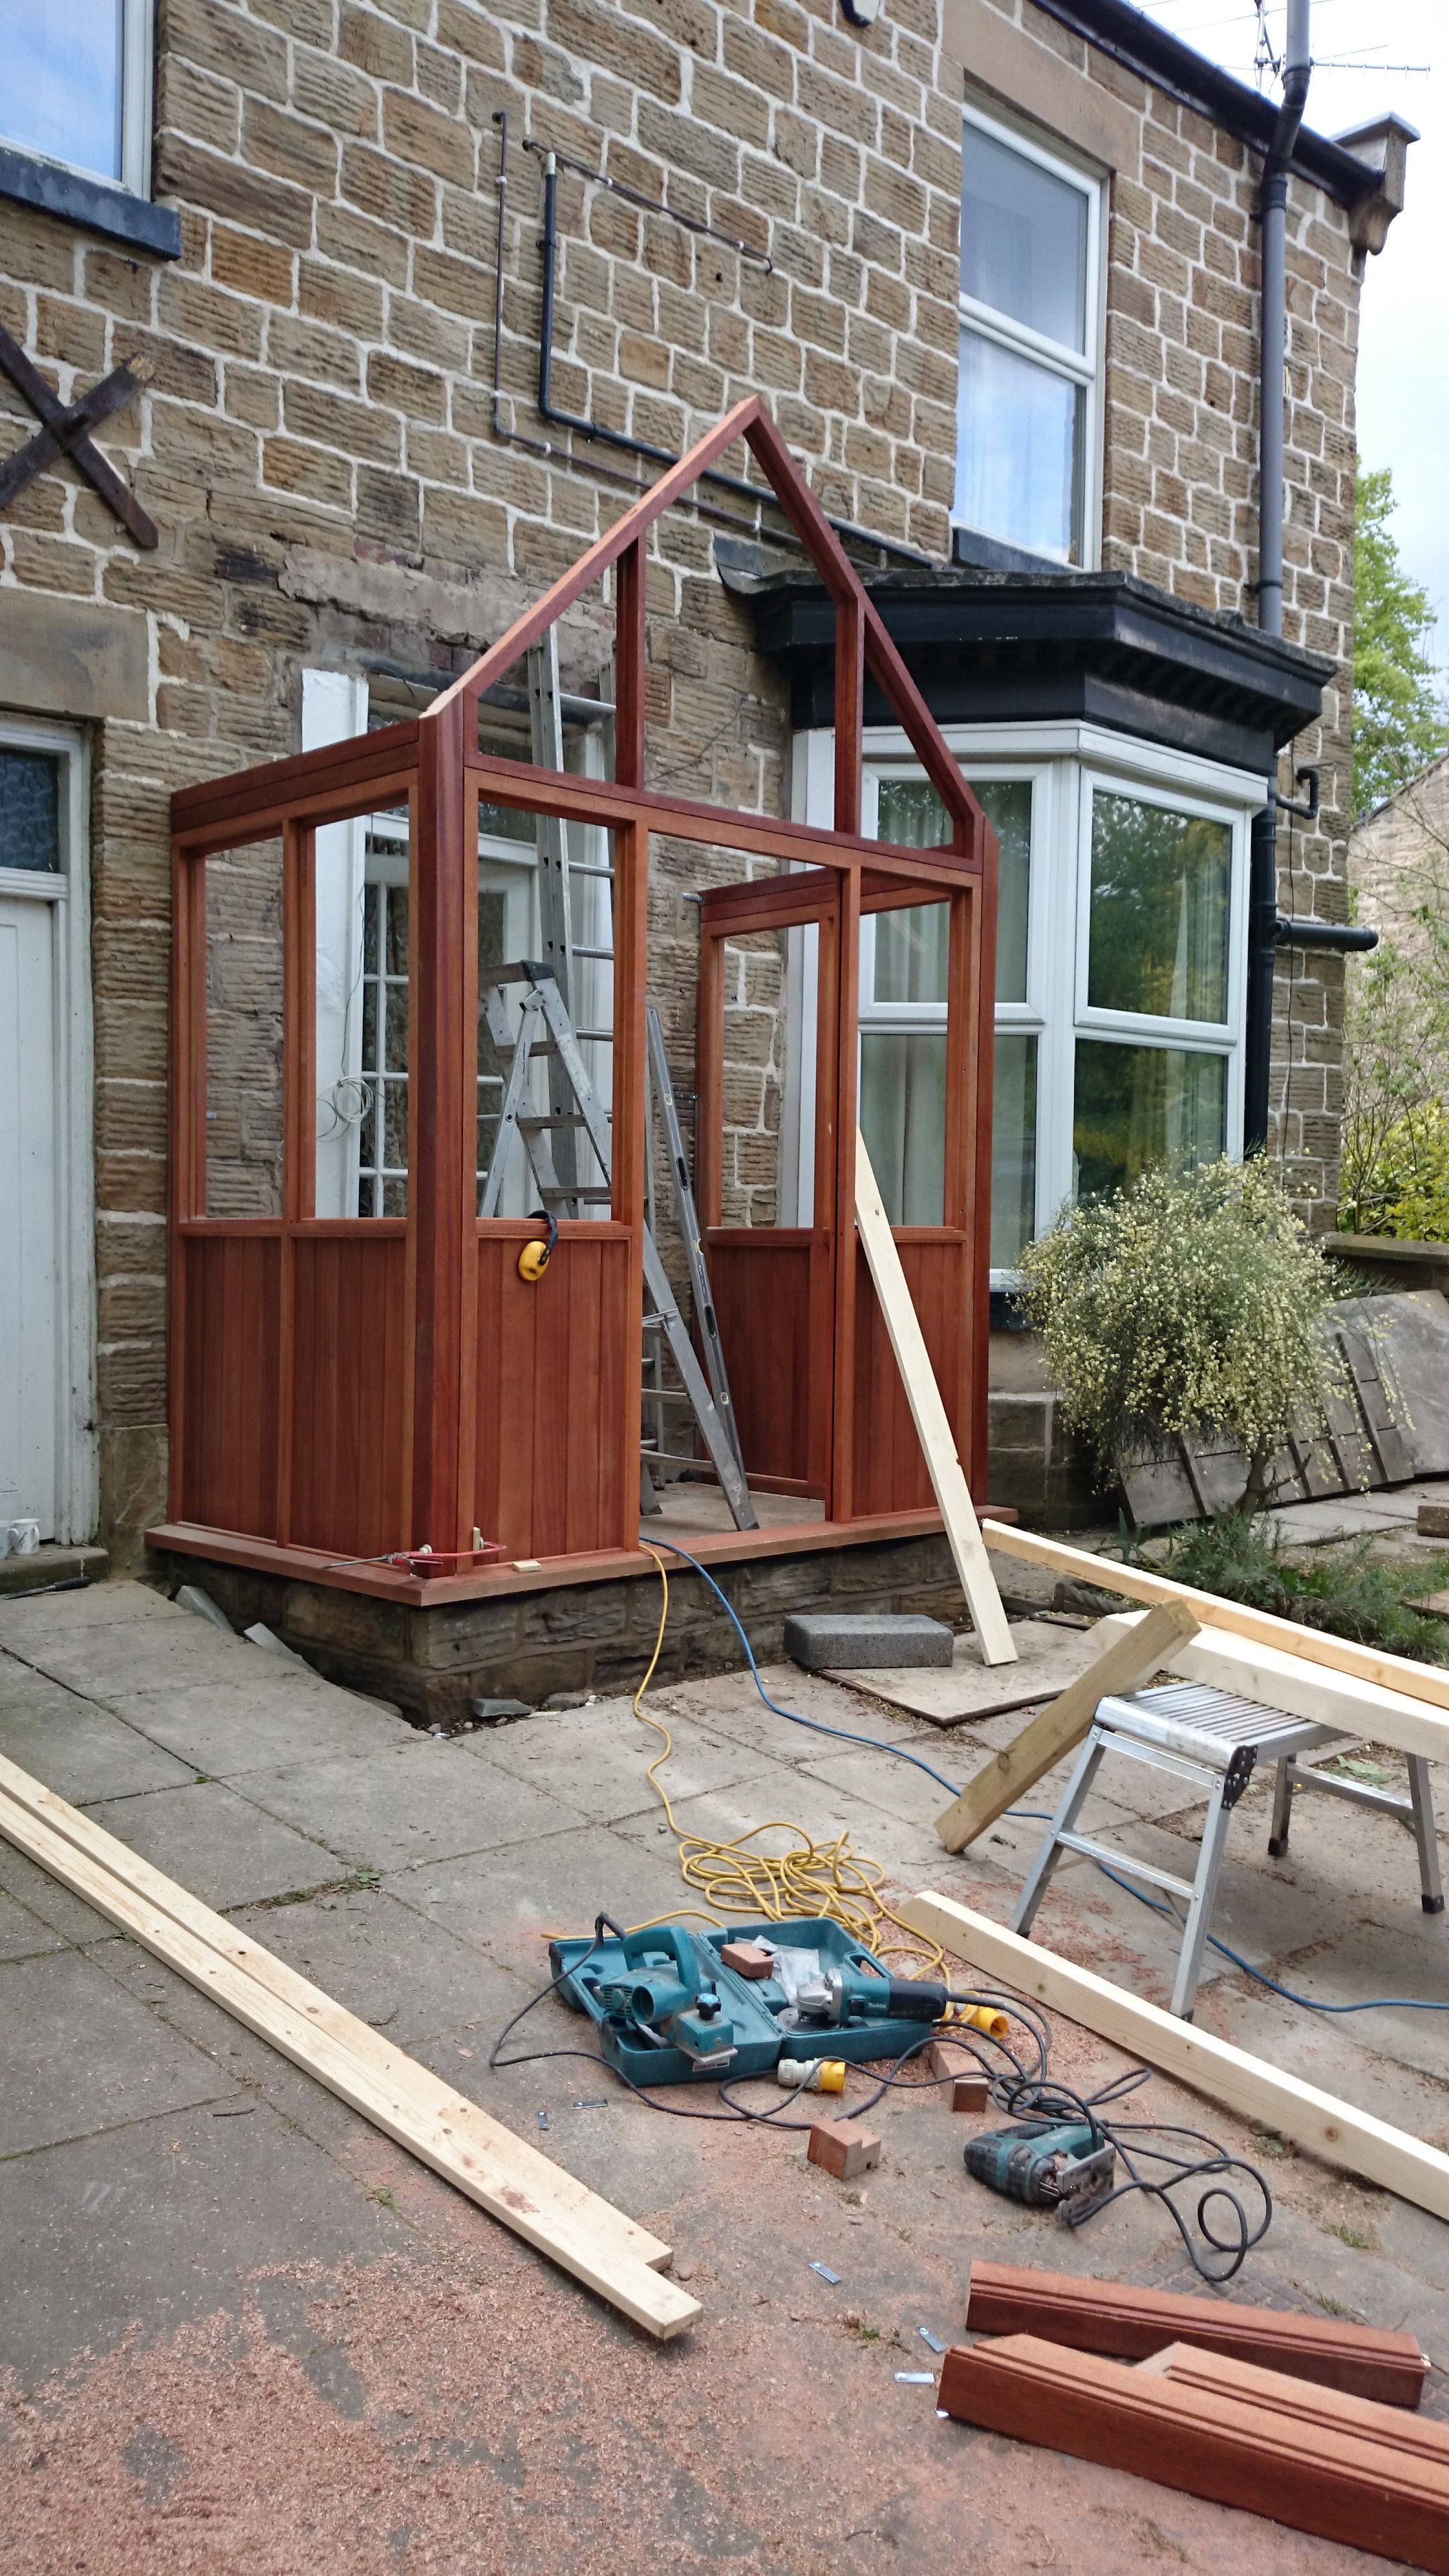 During construction of porch